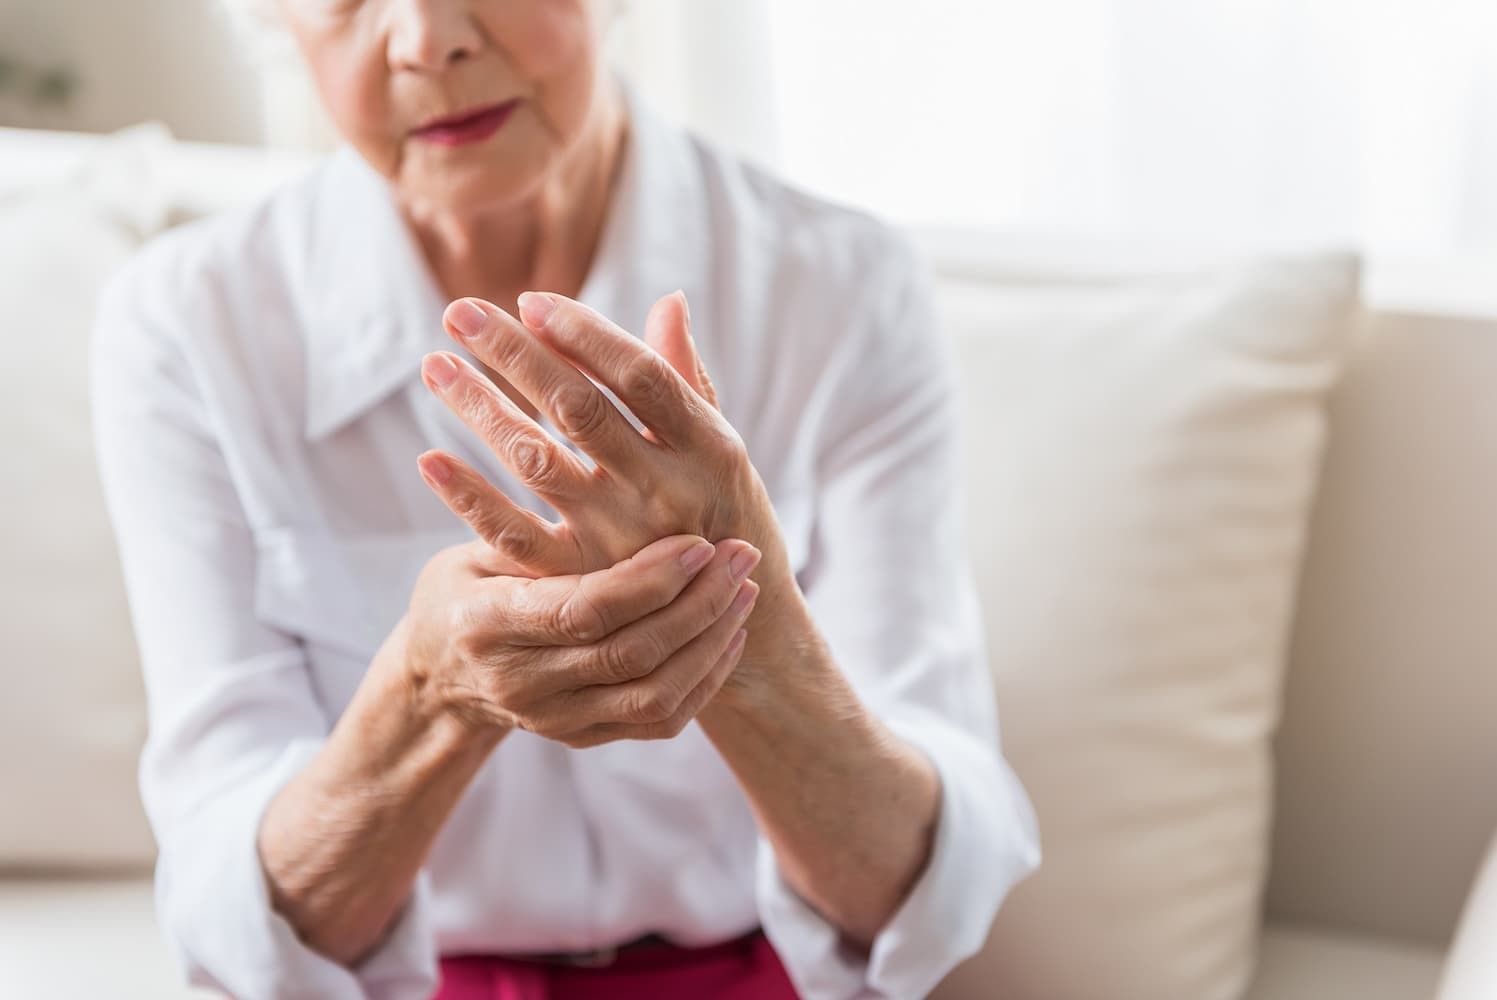 What Can I Do to Help My Arthritis?